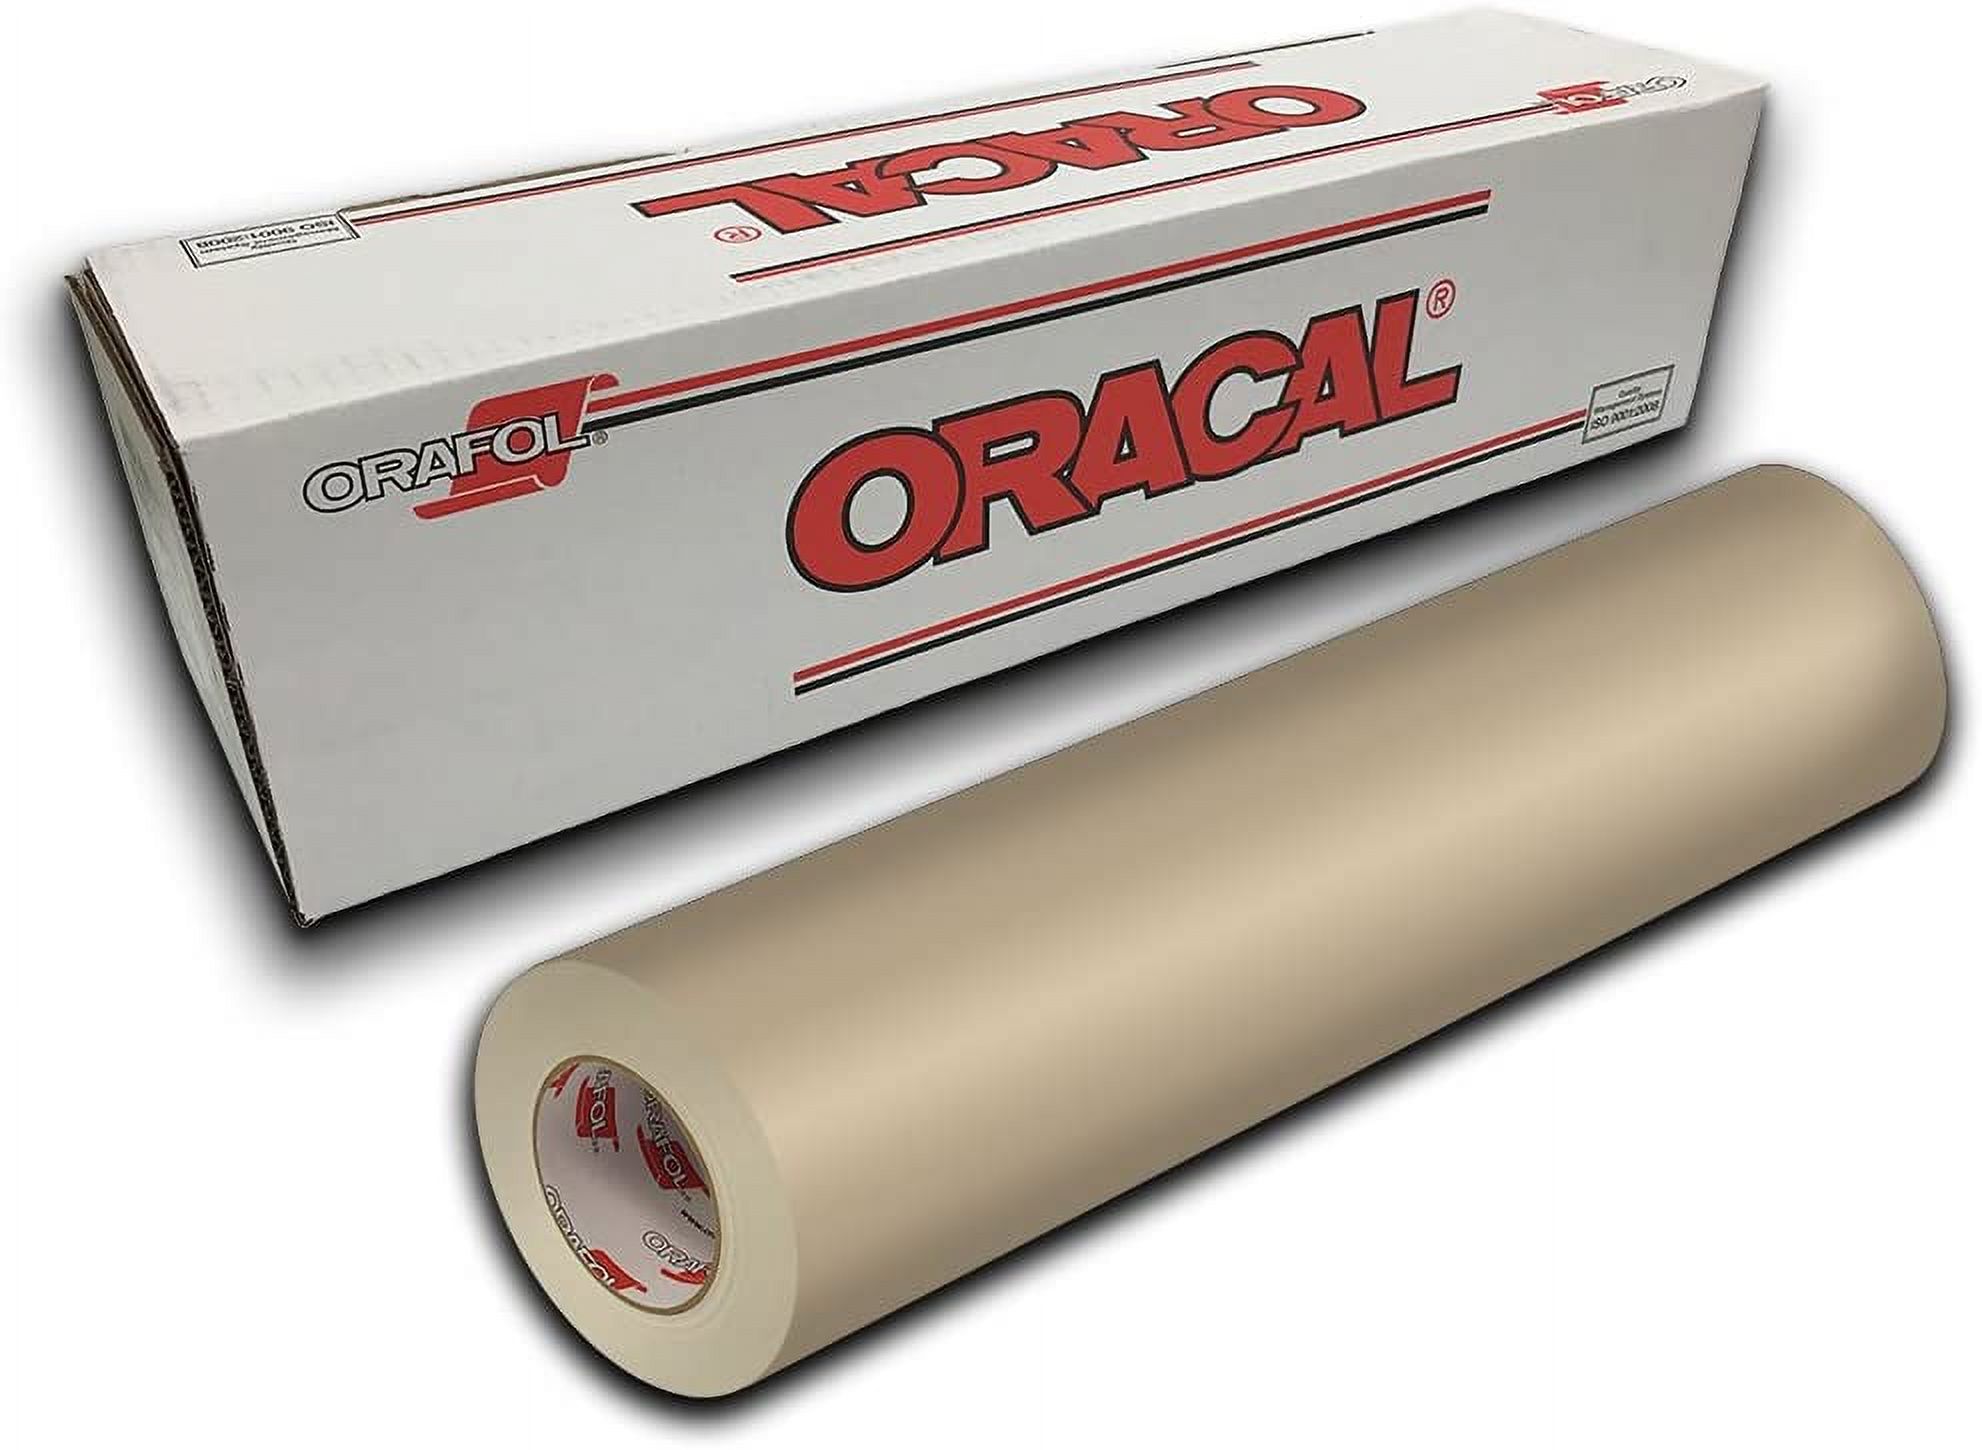 Oracal 651 Permanent Self-Adhesive Premium Craft Sticker Vinyl 24 inch x 50ft Roll - Beige, Size: 24 Inches by 50 Feet, Brown